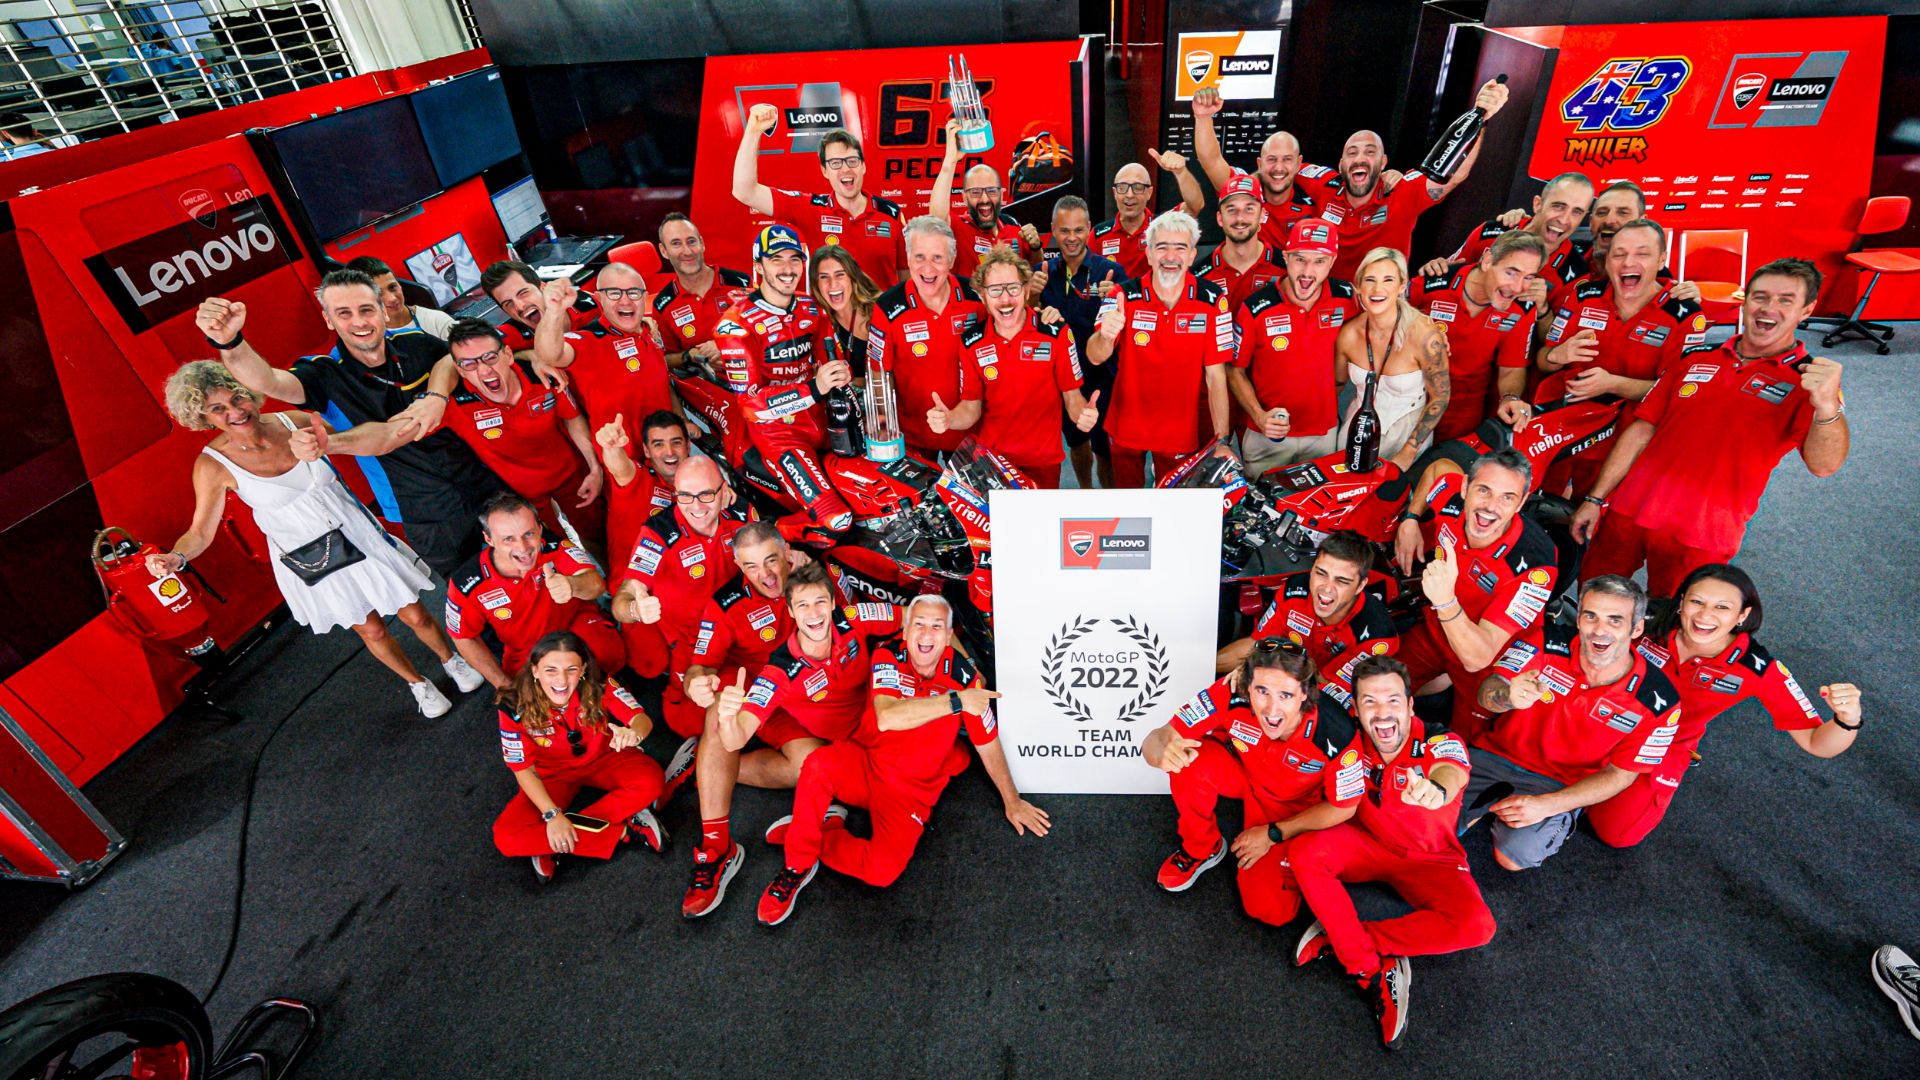 The Ducati Lenovo Team wins the MotoGP 2022 team title thanks to another stunning victory by Pecco Bagnaia.